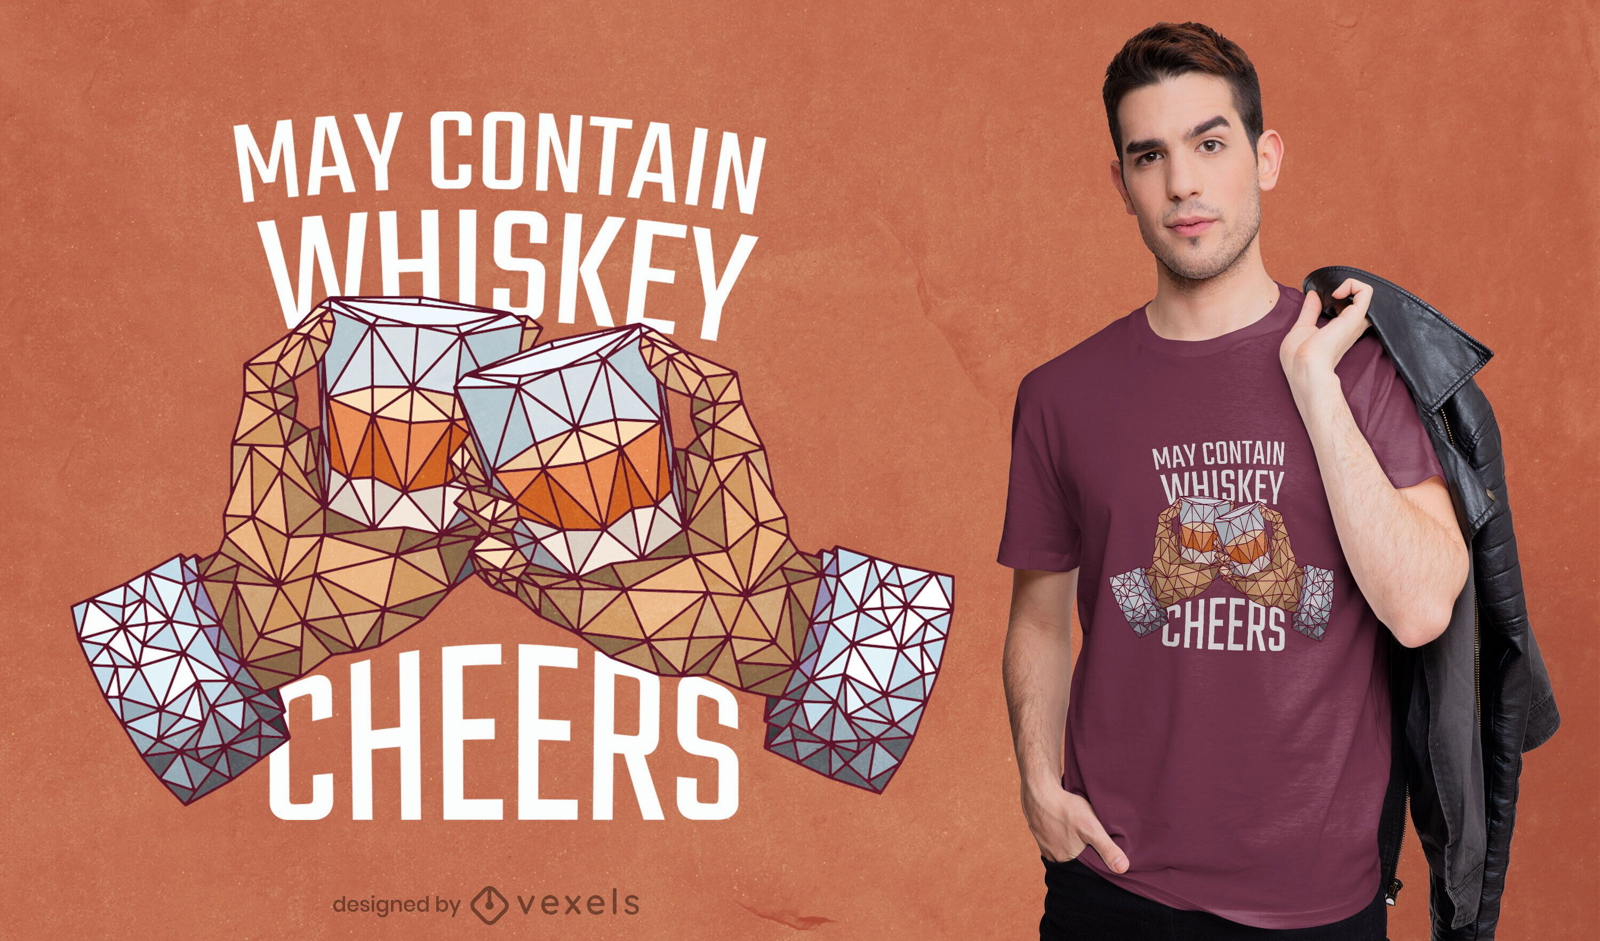 May contain whiskey t-shirt design